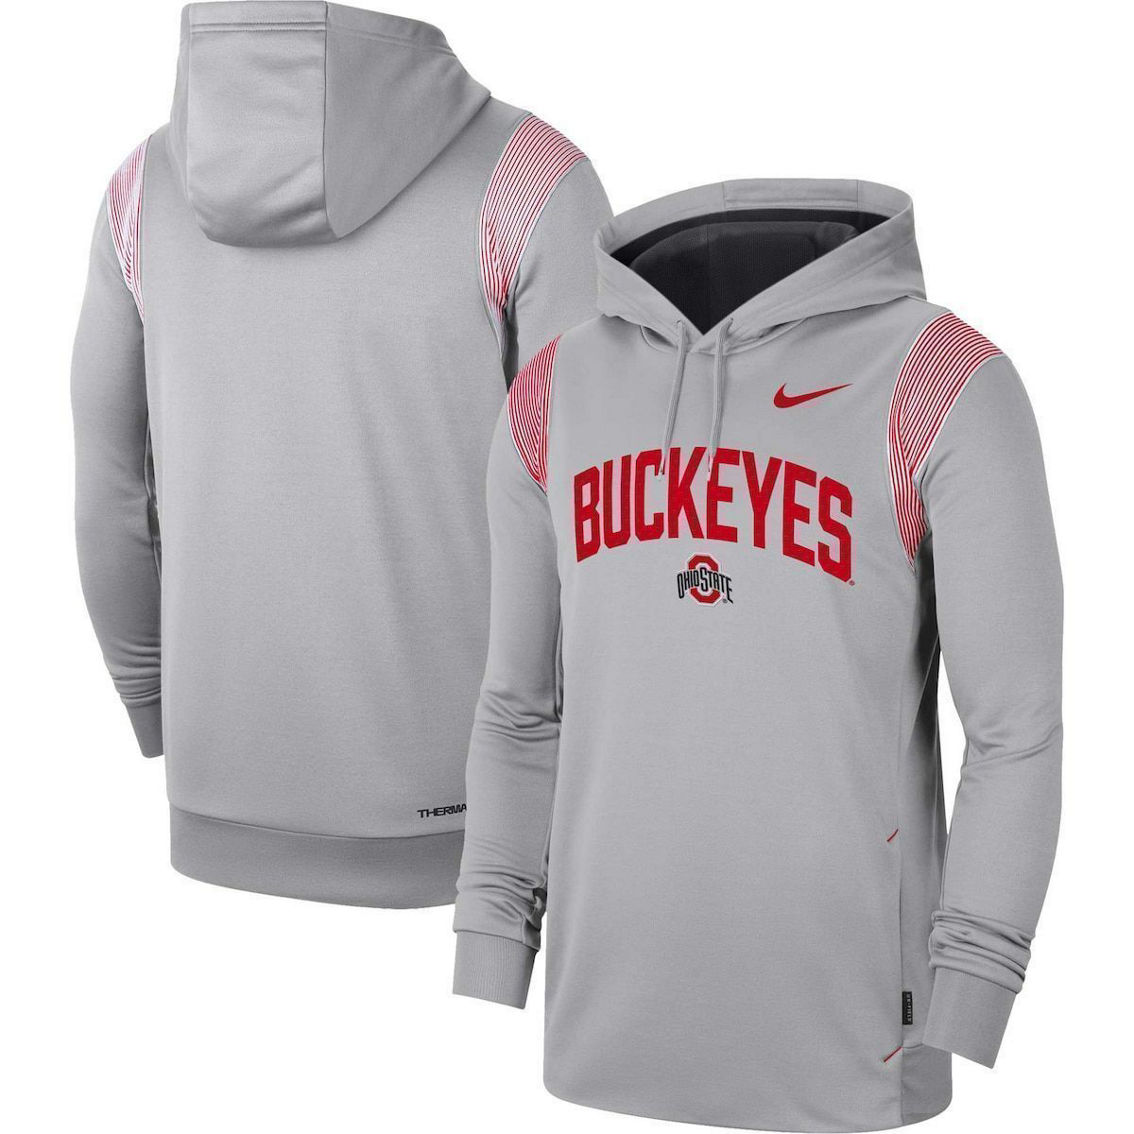 Men's Nike Gray Ohio State Buckeyes 2022 Game Day Sideline Performance Pullover Hoodie - Image 1 of 4